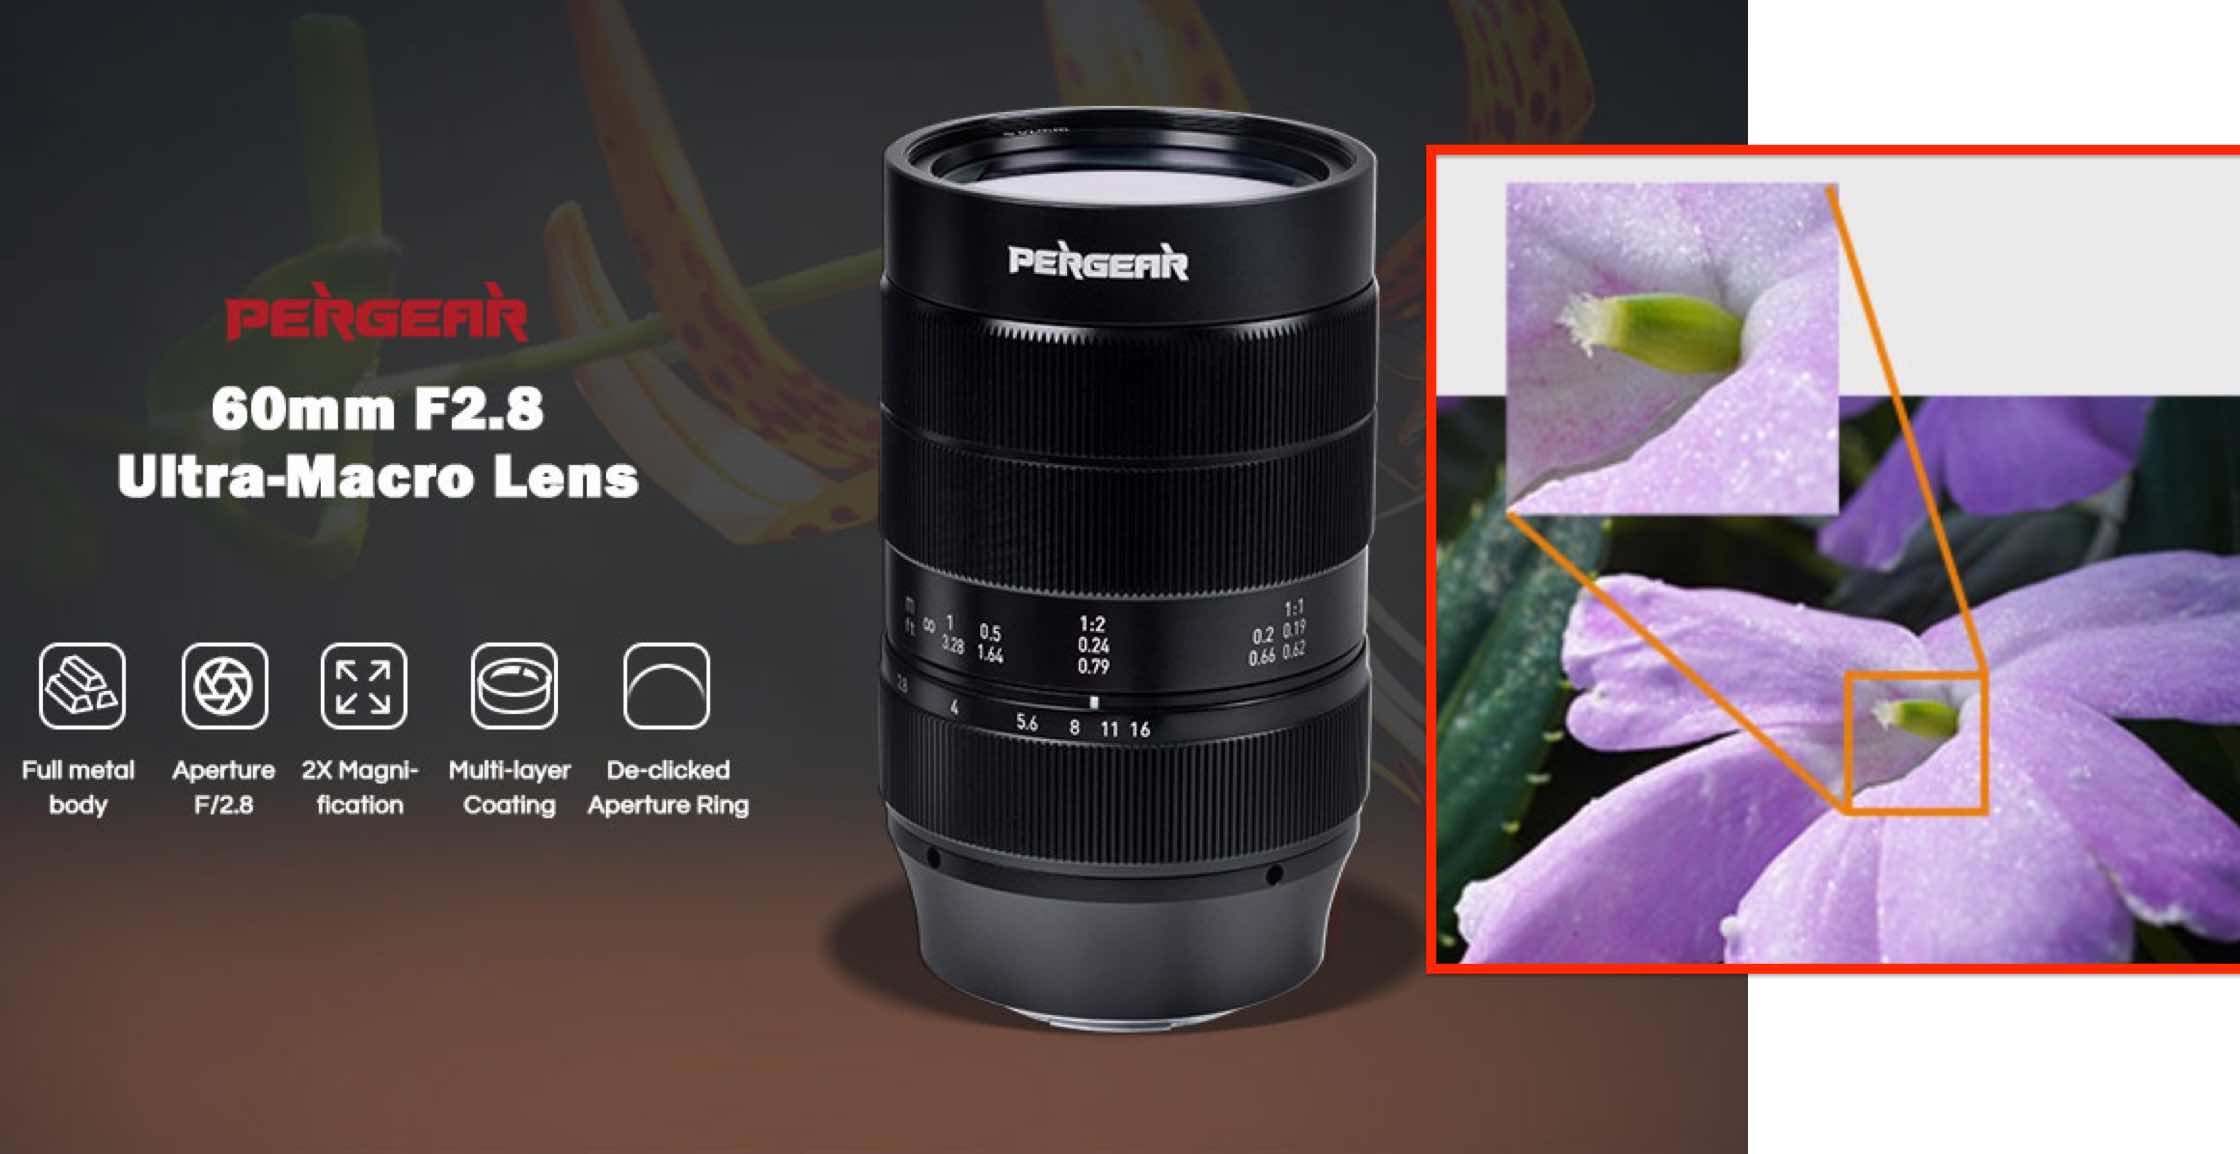 Pergear 60mm f/2.8 Ultra-Macro 2x Magnification Lens Released and 